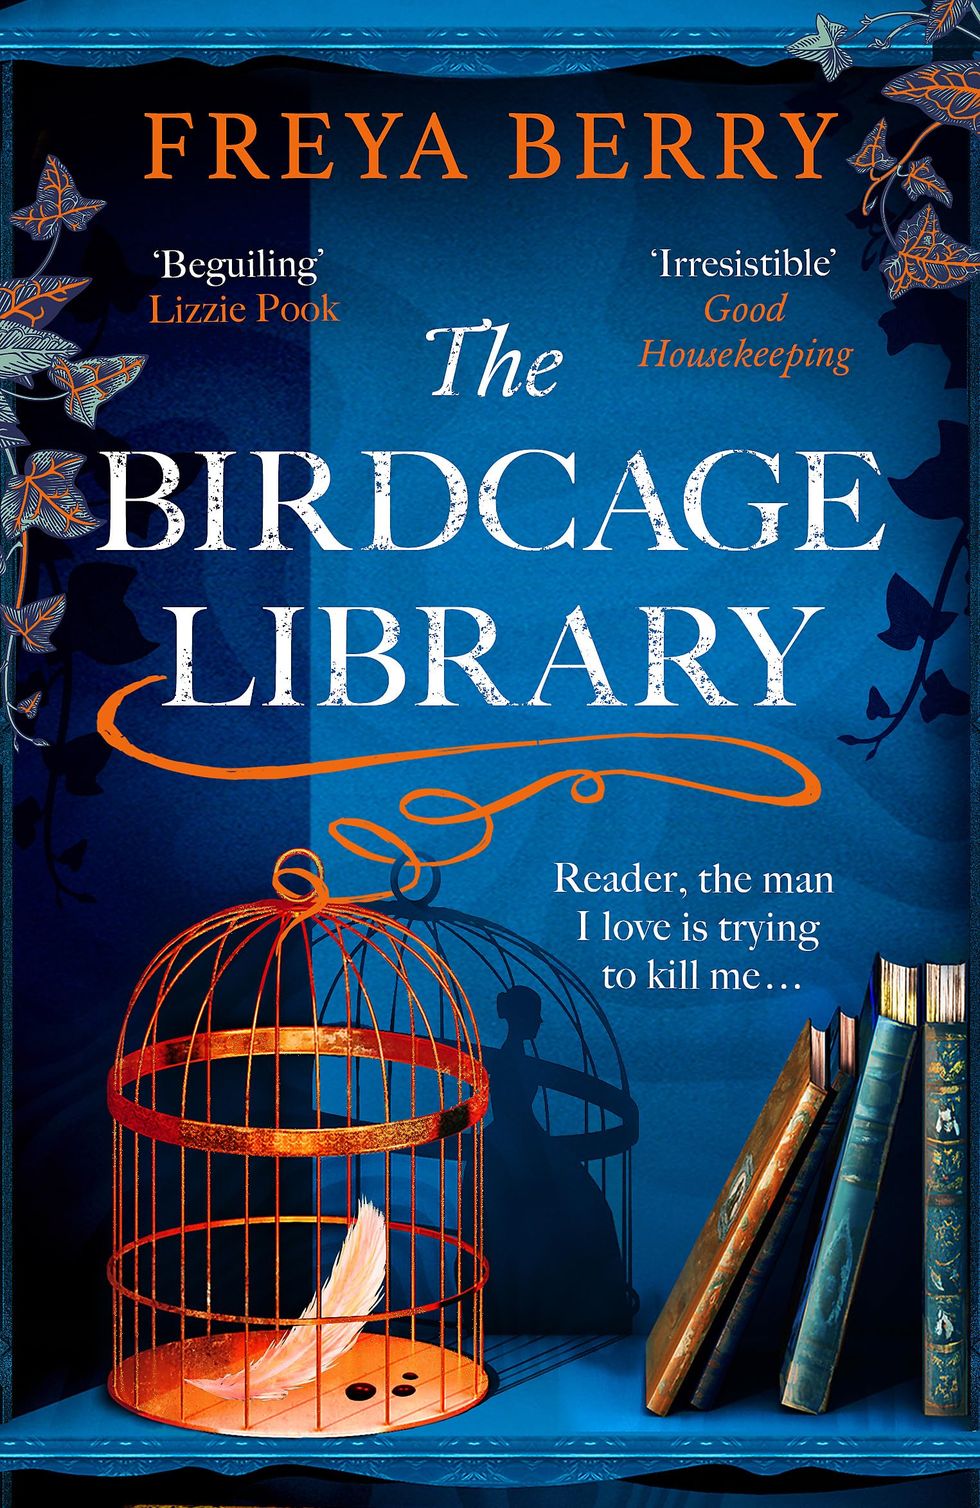 The Birdcage Library by Freya Berry